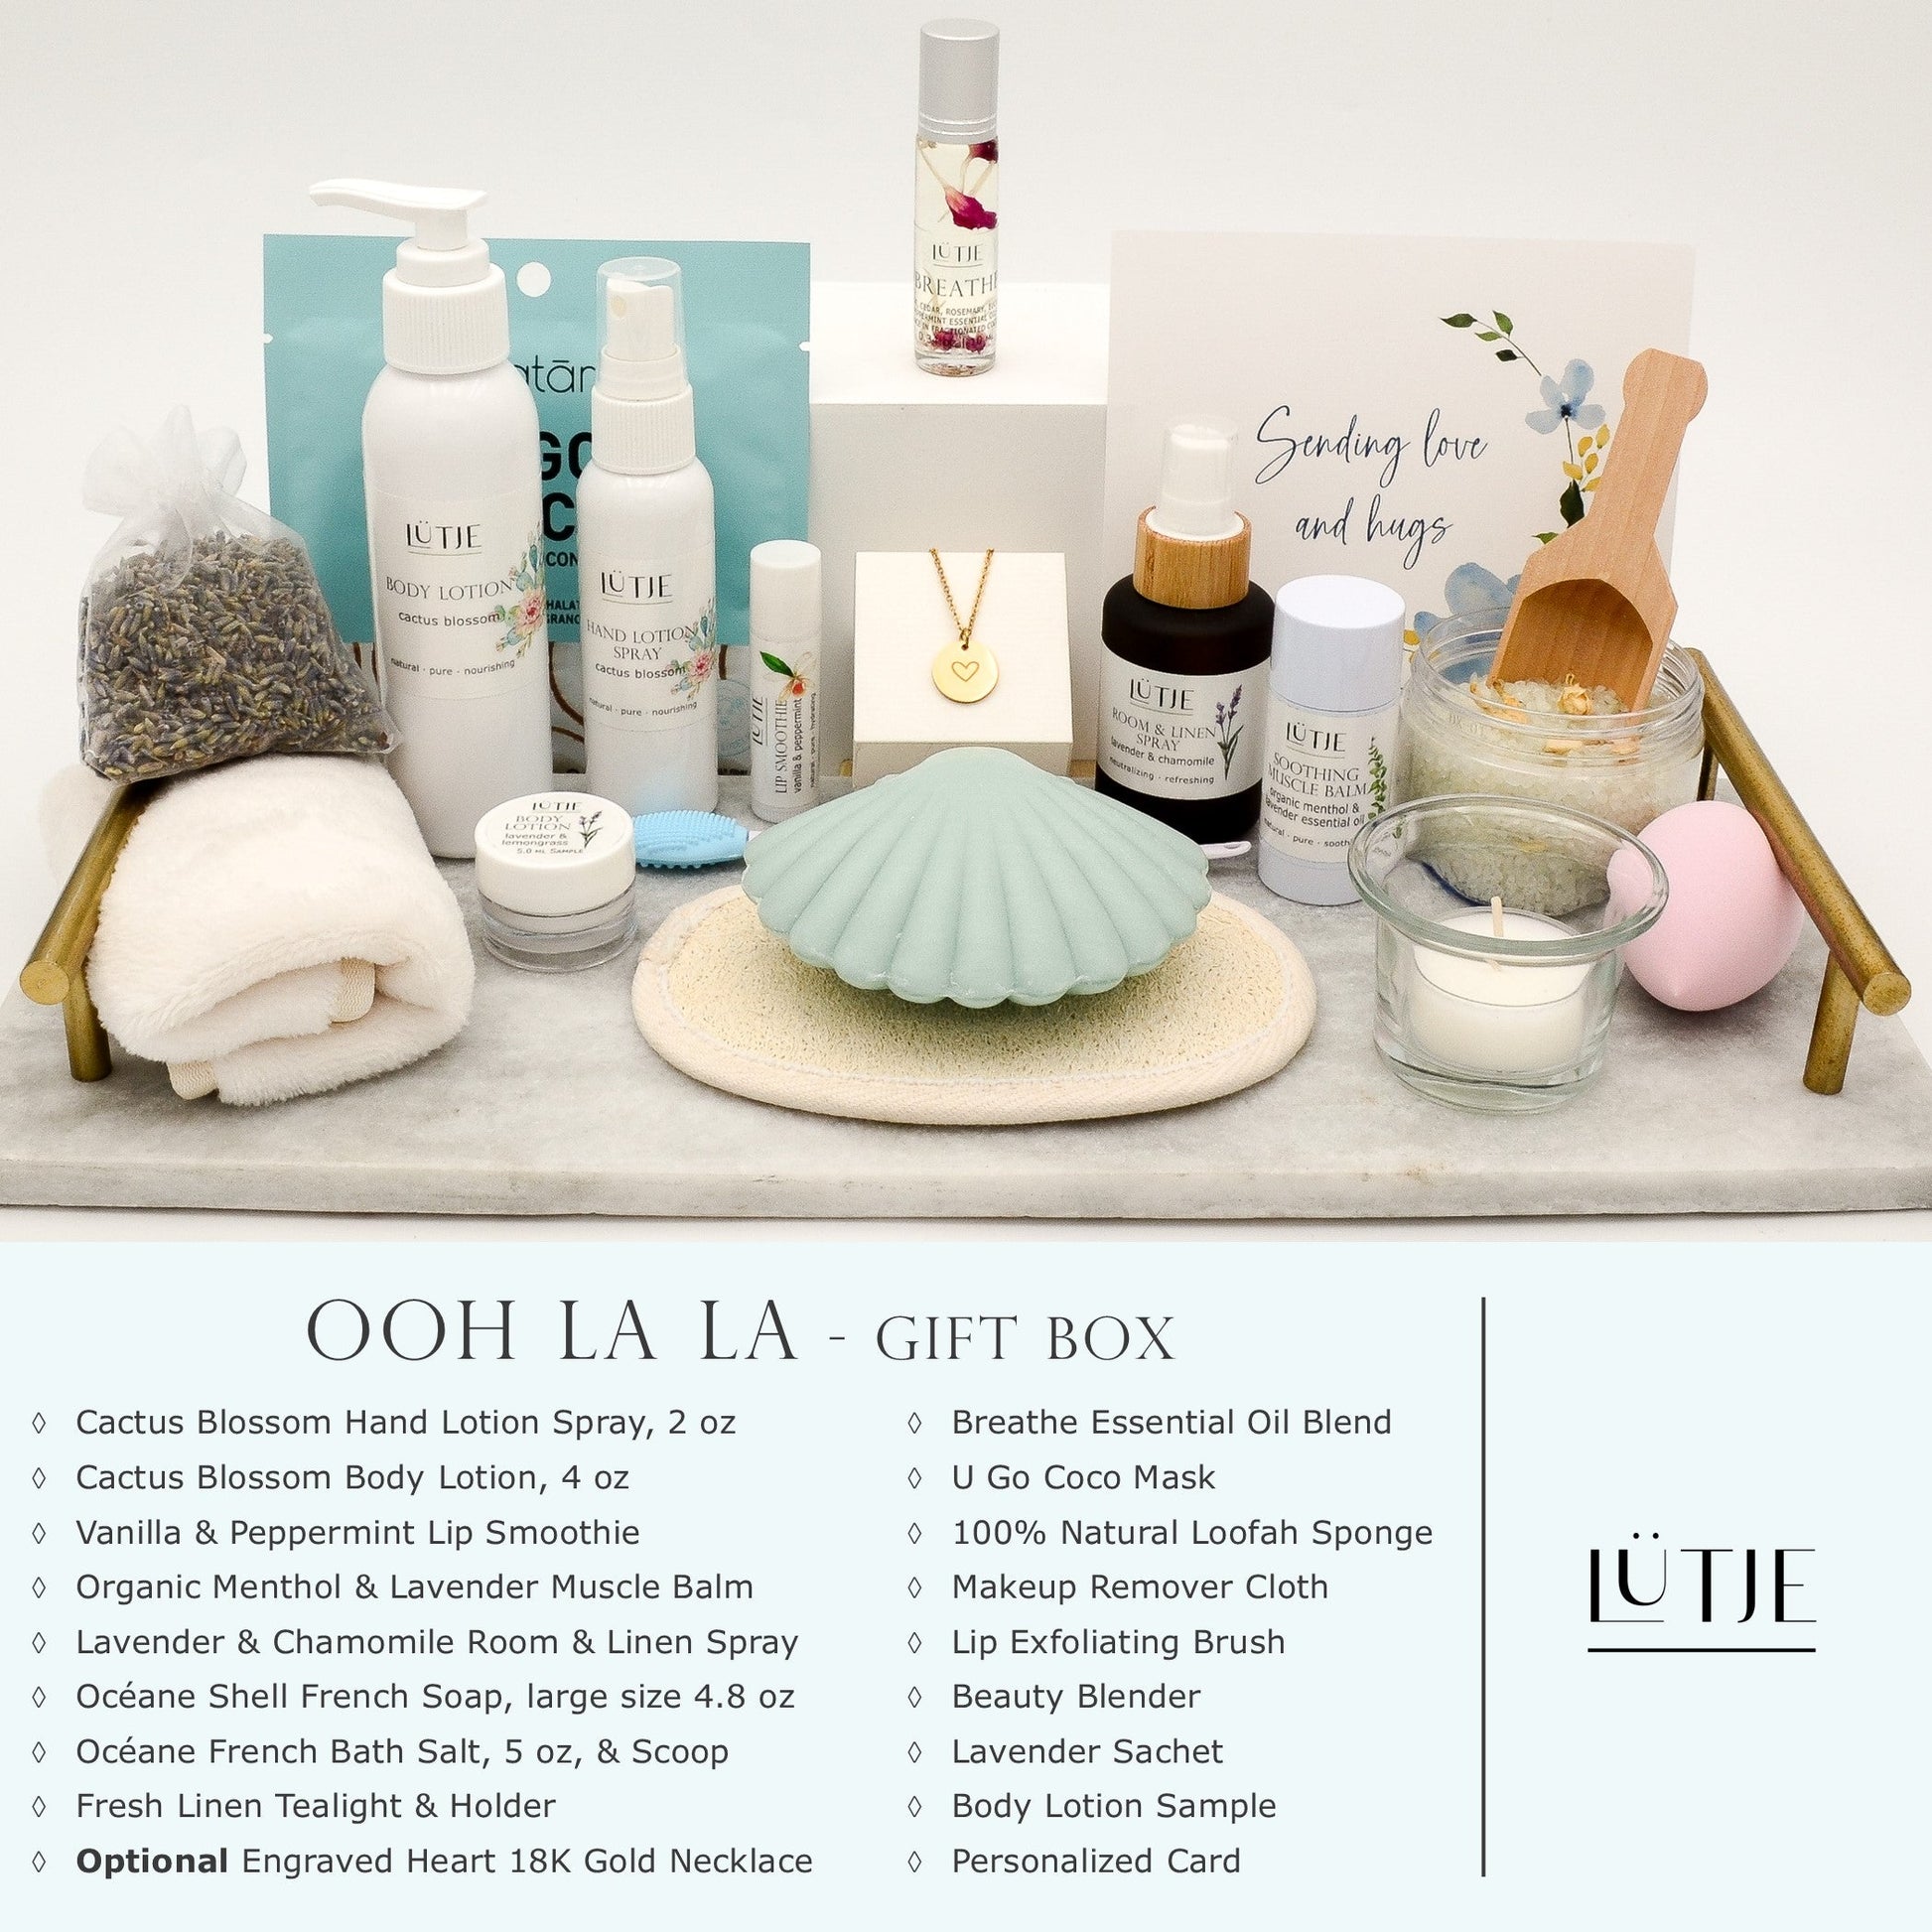 Ooh La La Gift Box for women, wife, daughter, BFF, sister, mom, or grandma, includes Cactus Blossom hand lotion spray and body lotion, essential oil, lip balm, soothing muscle balm, Lavender & Chamomile room & linen spray, French soap, French bath salts, hydrating face mask, other bath, spa and self-care items, and 18K gold-plated necklace with engraved heart.